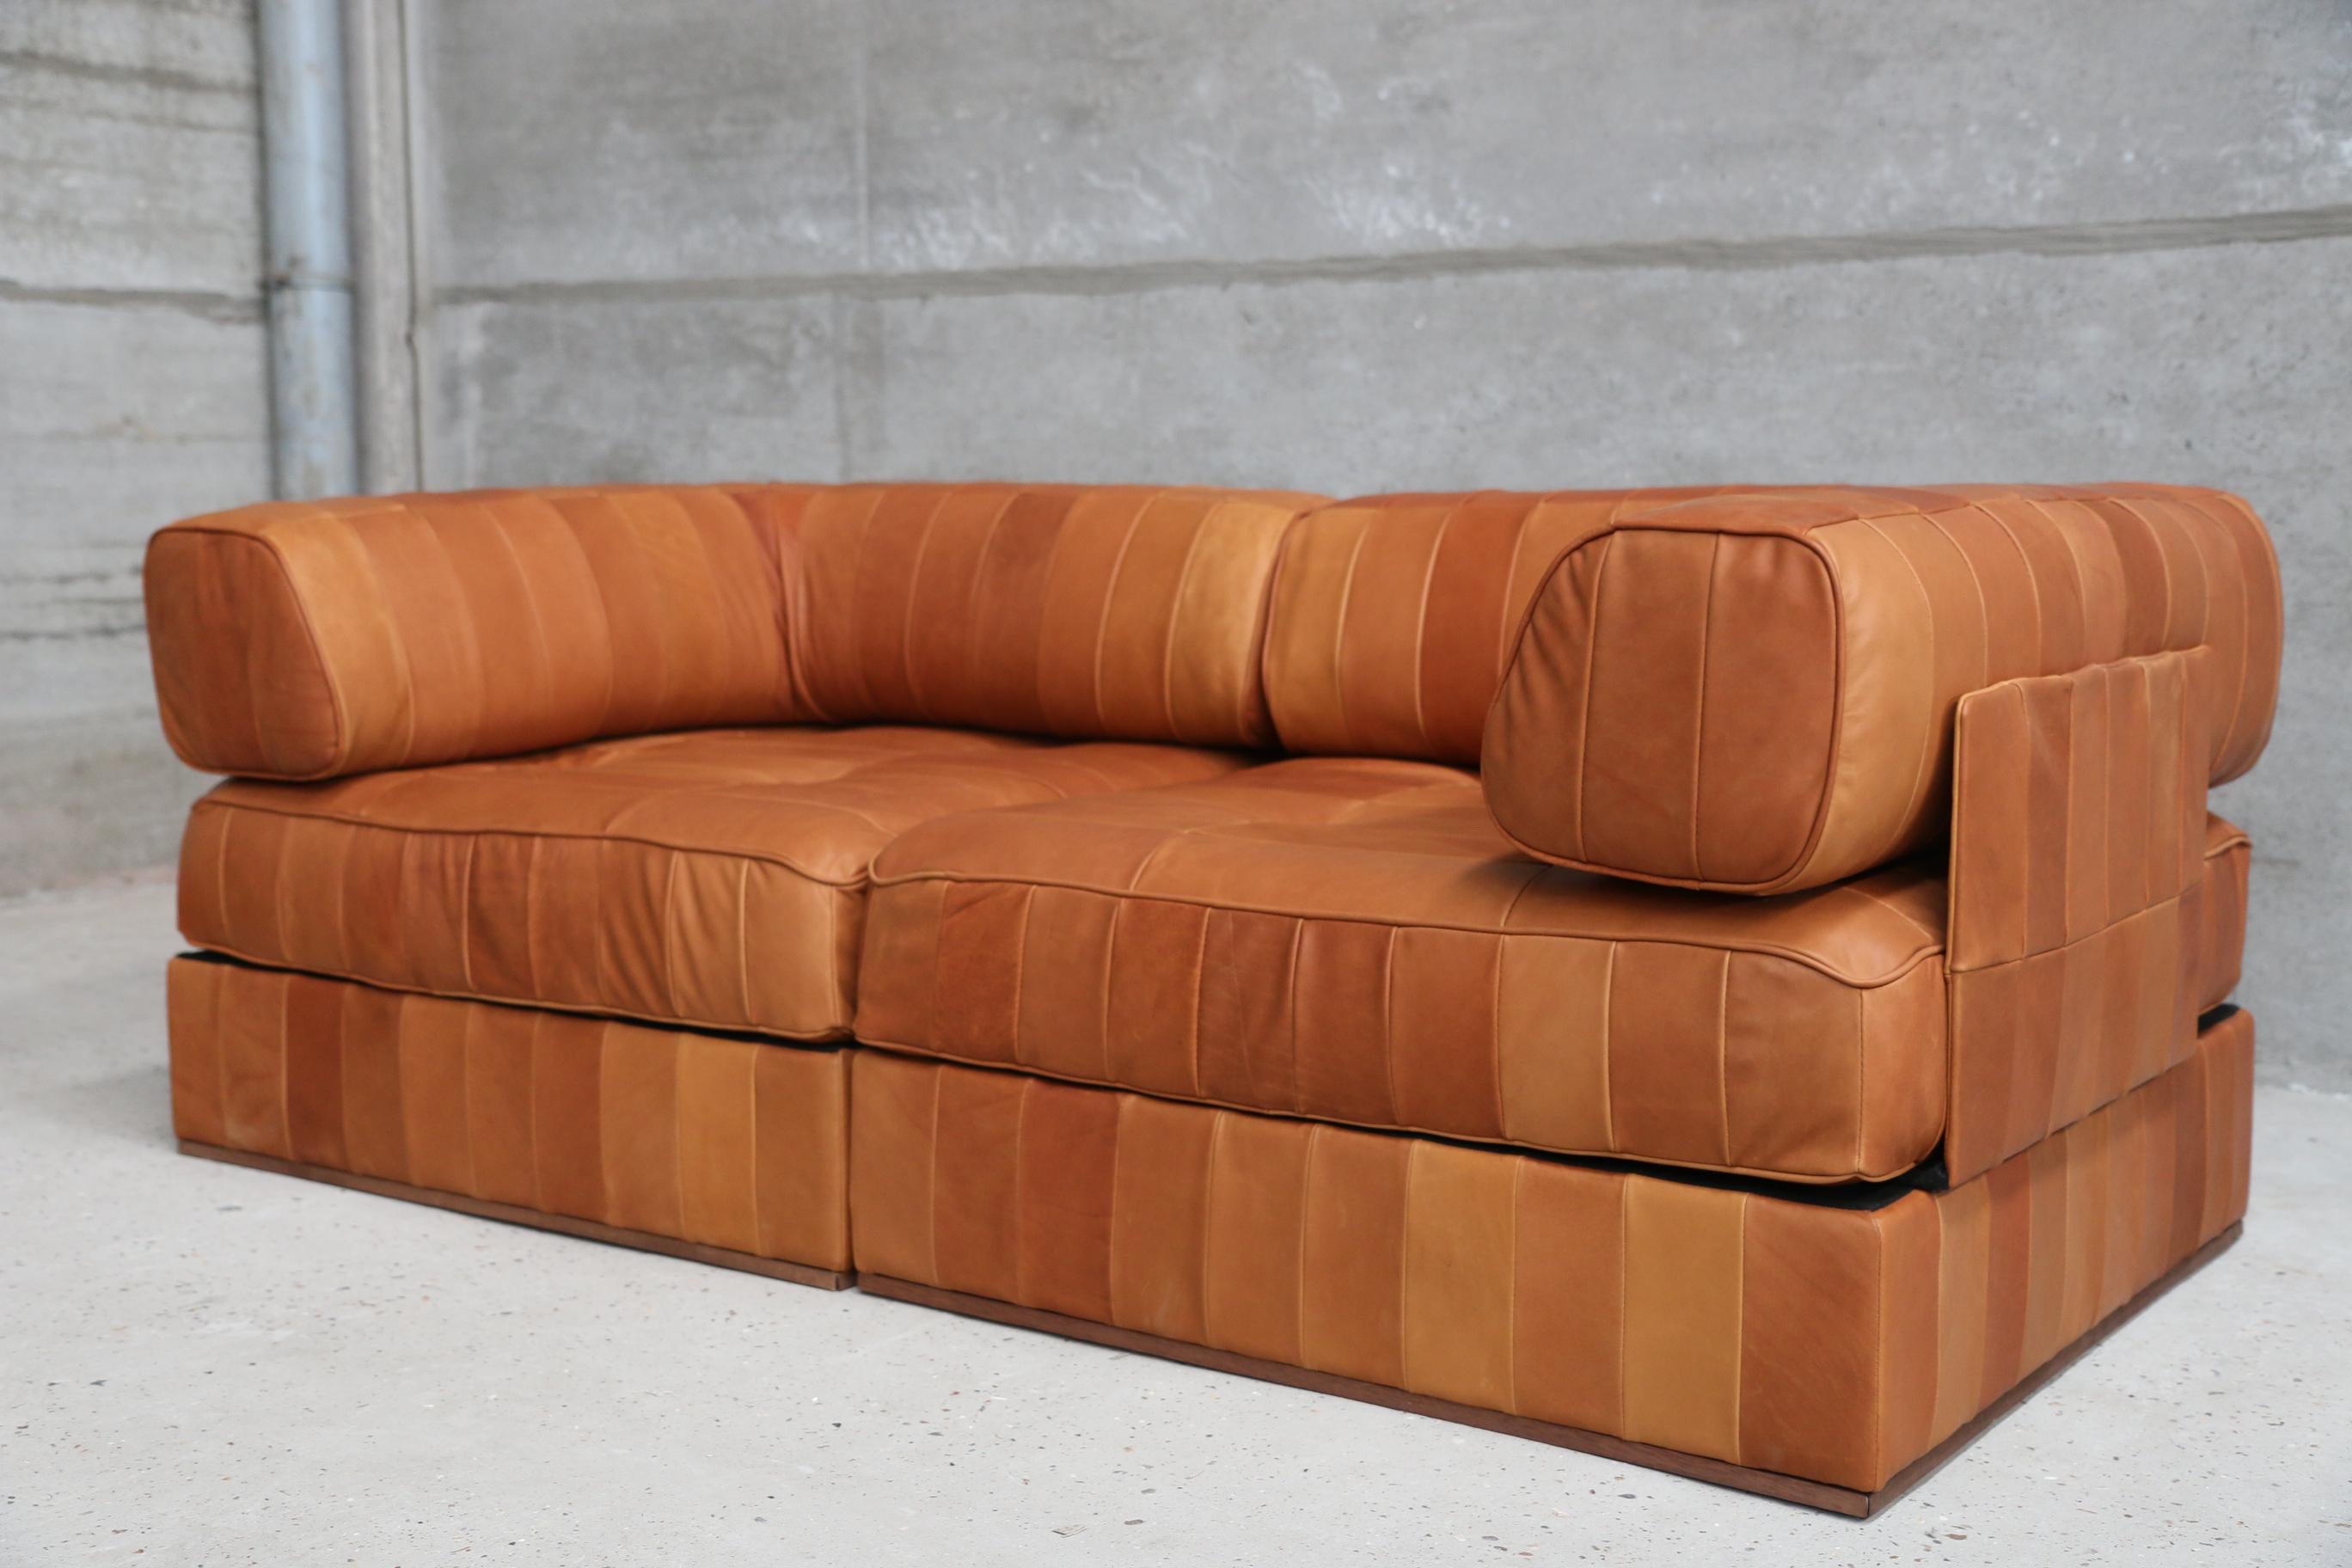 Iconic ds88 modular patchwork sofa restored in our signature vintage aniline leather by Bellalu Denmark. New foam and new leather. You can play with the modular composition of the sofa.
See pictures for dimensions and how its build up or